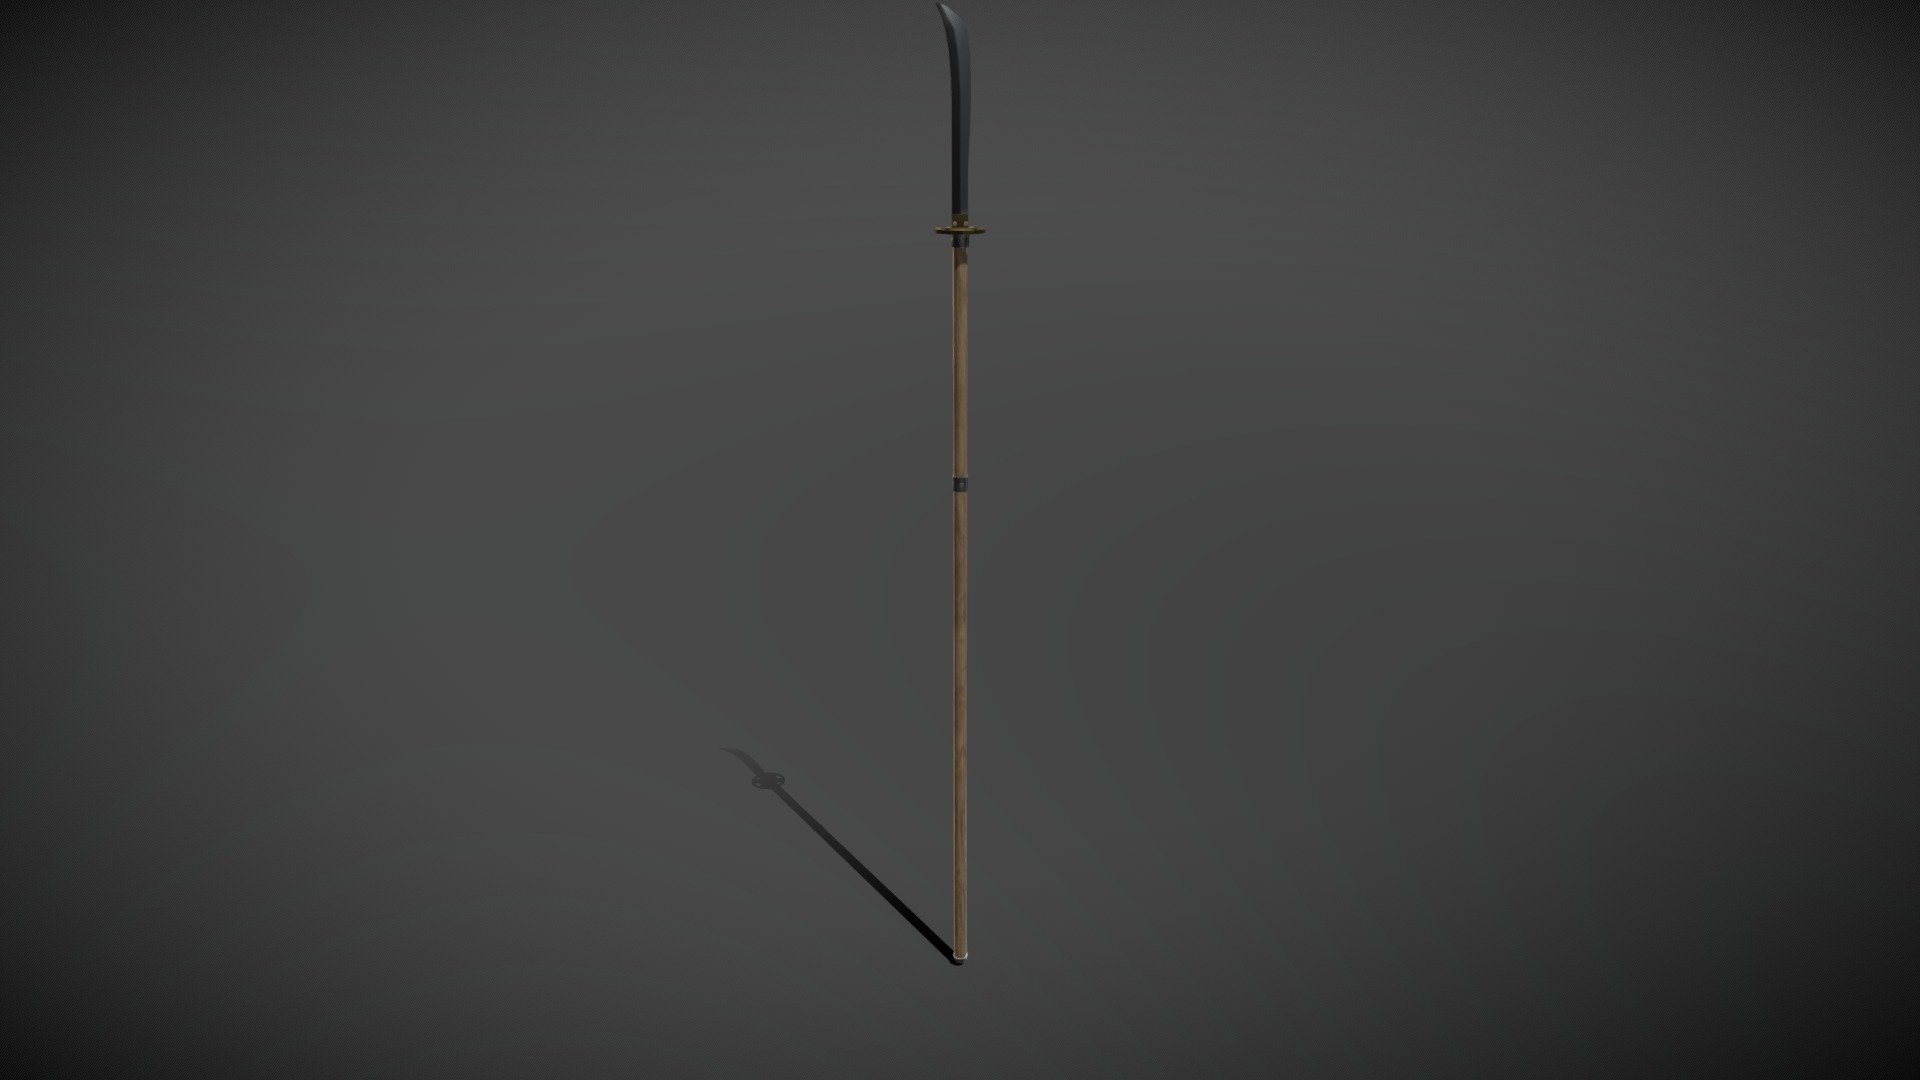 The naginata is a traditional Japanese polearm used by samurai - Naginata Low poly - Download Free 3D model by KongouRa (@RanedoJuan) 3d model